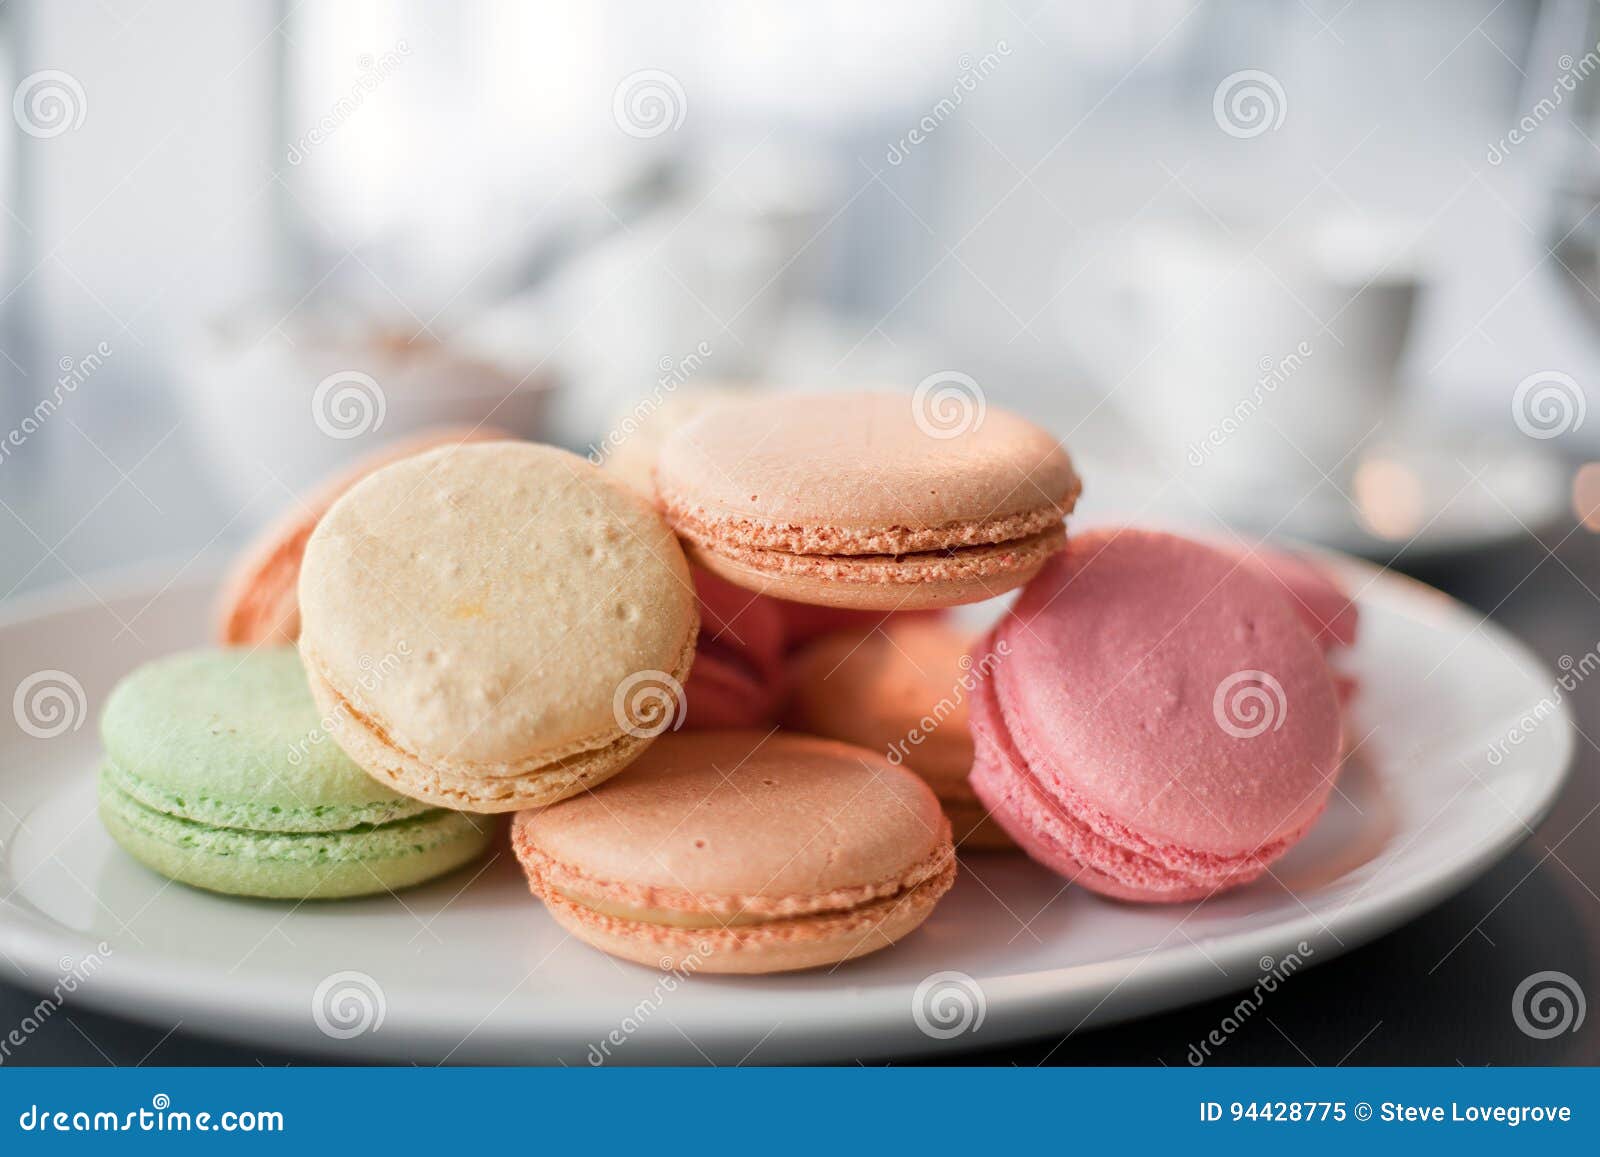 Plate of Macarons in a Cafe Stock Image - Image of dessert, flavours ...